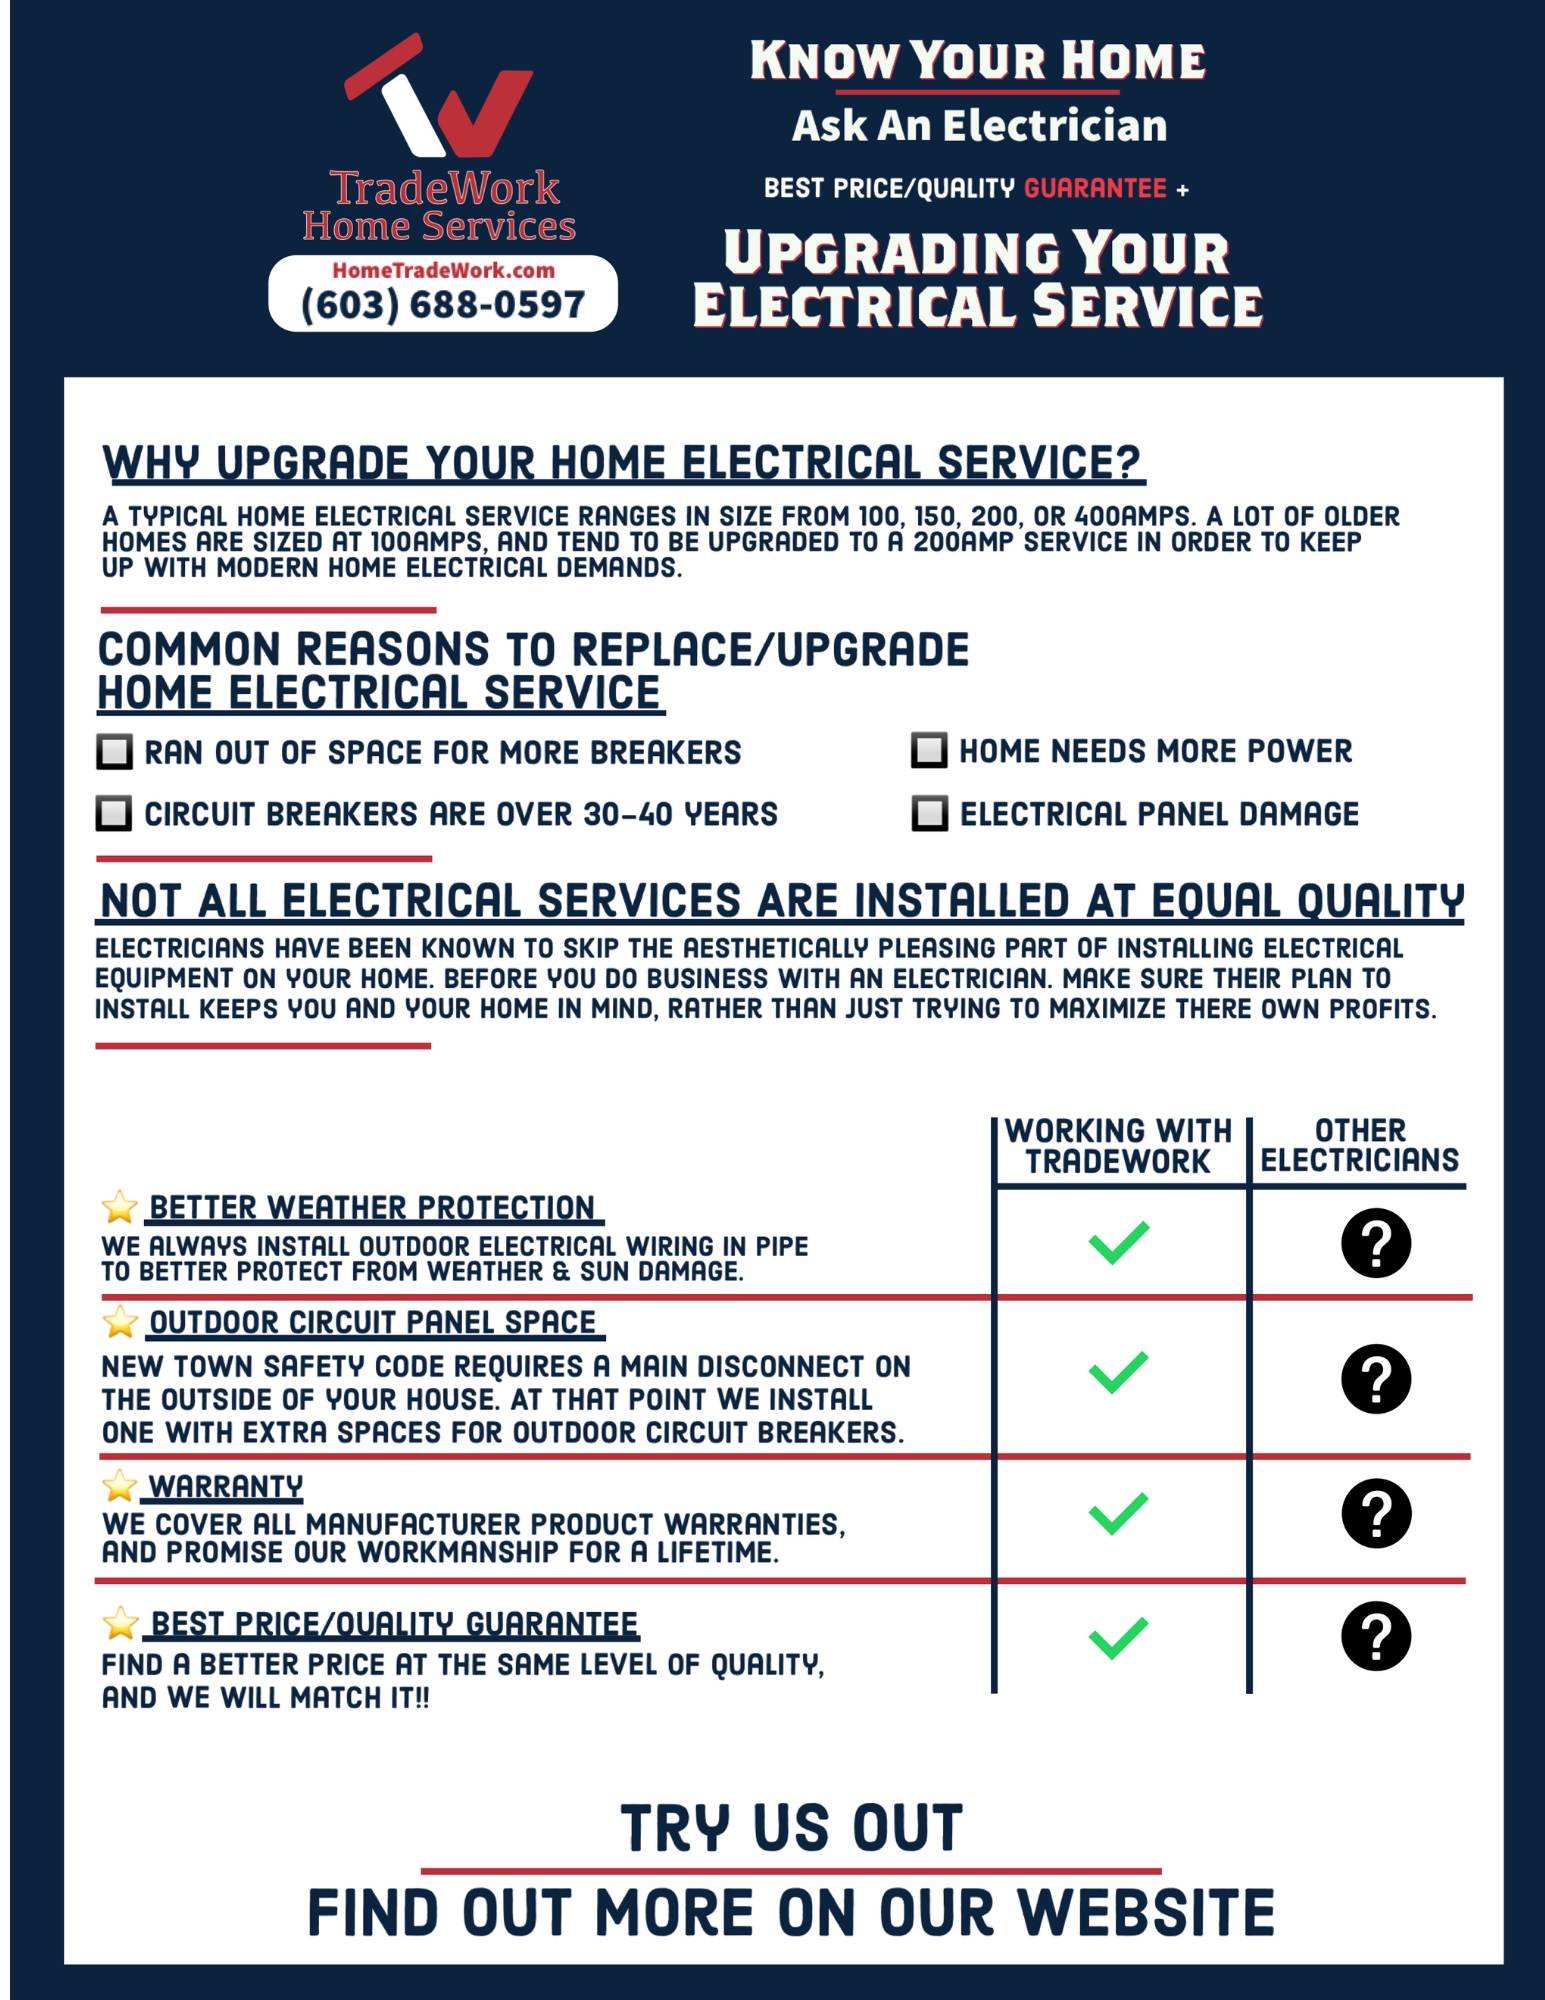 Home electrical utility service upgrade explained with install locations